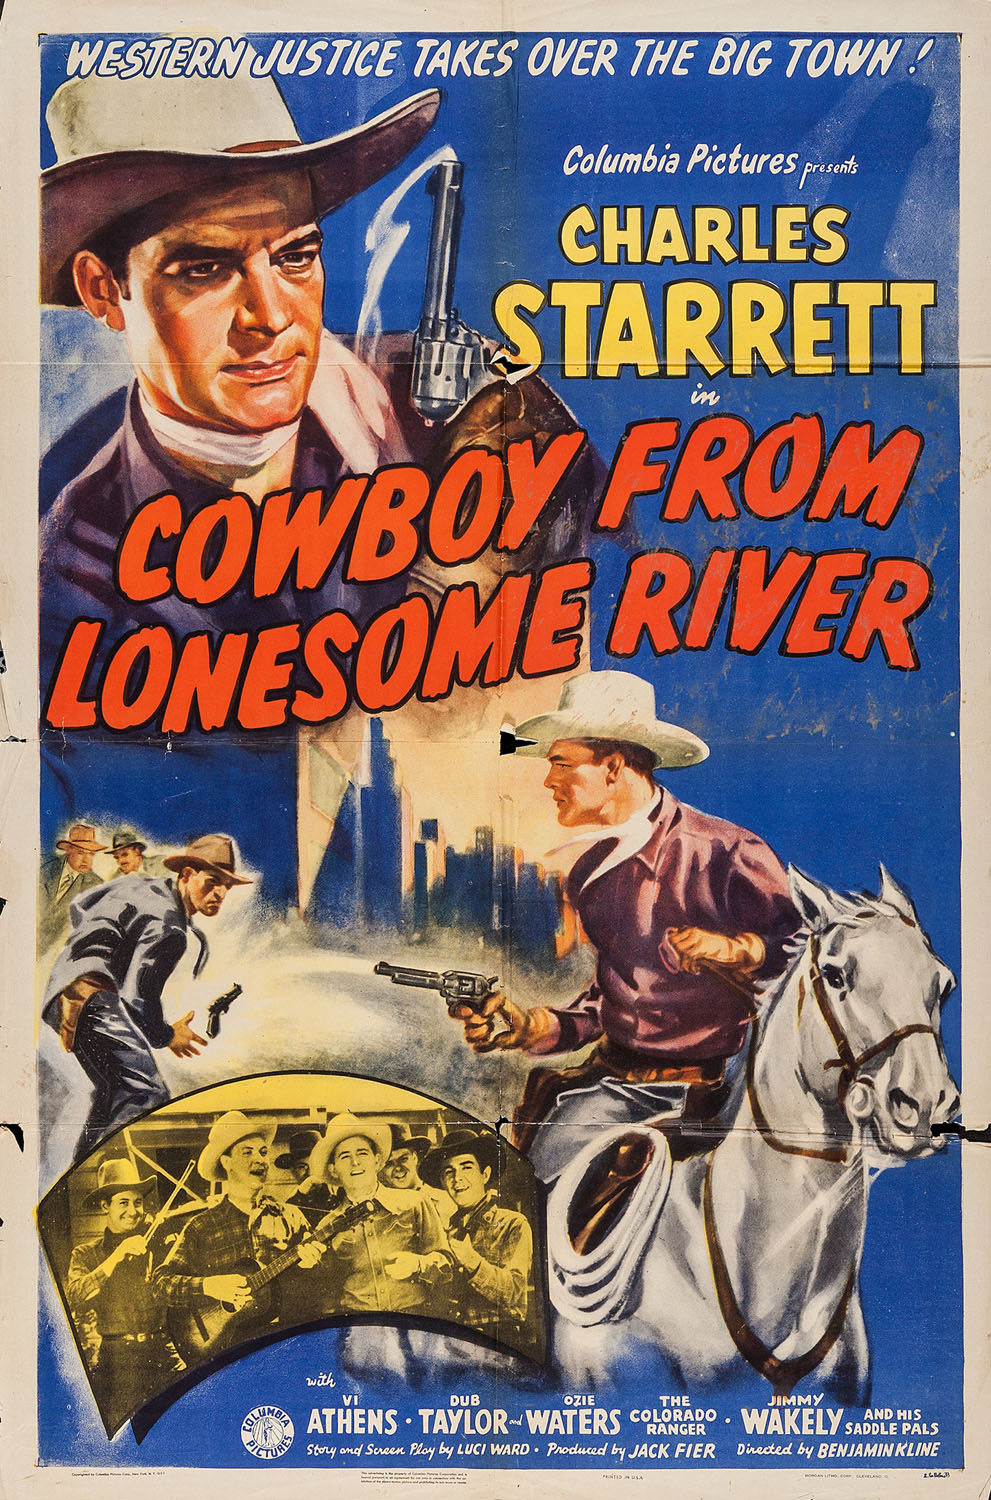 COWBOY FROM LONESOME RIVER